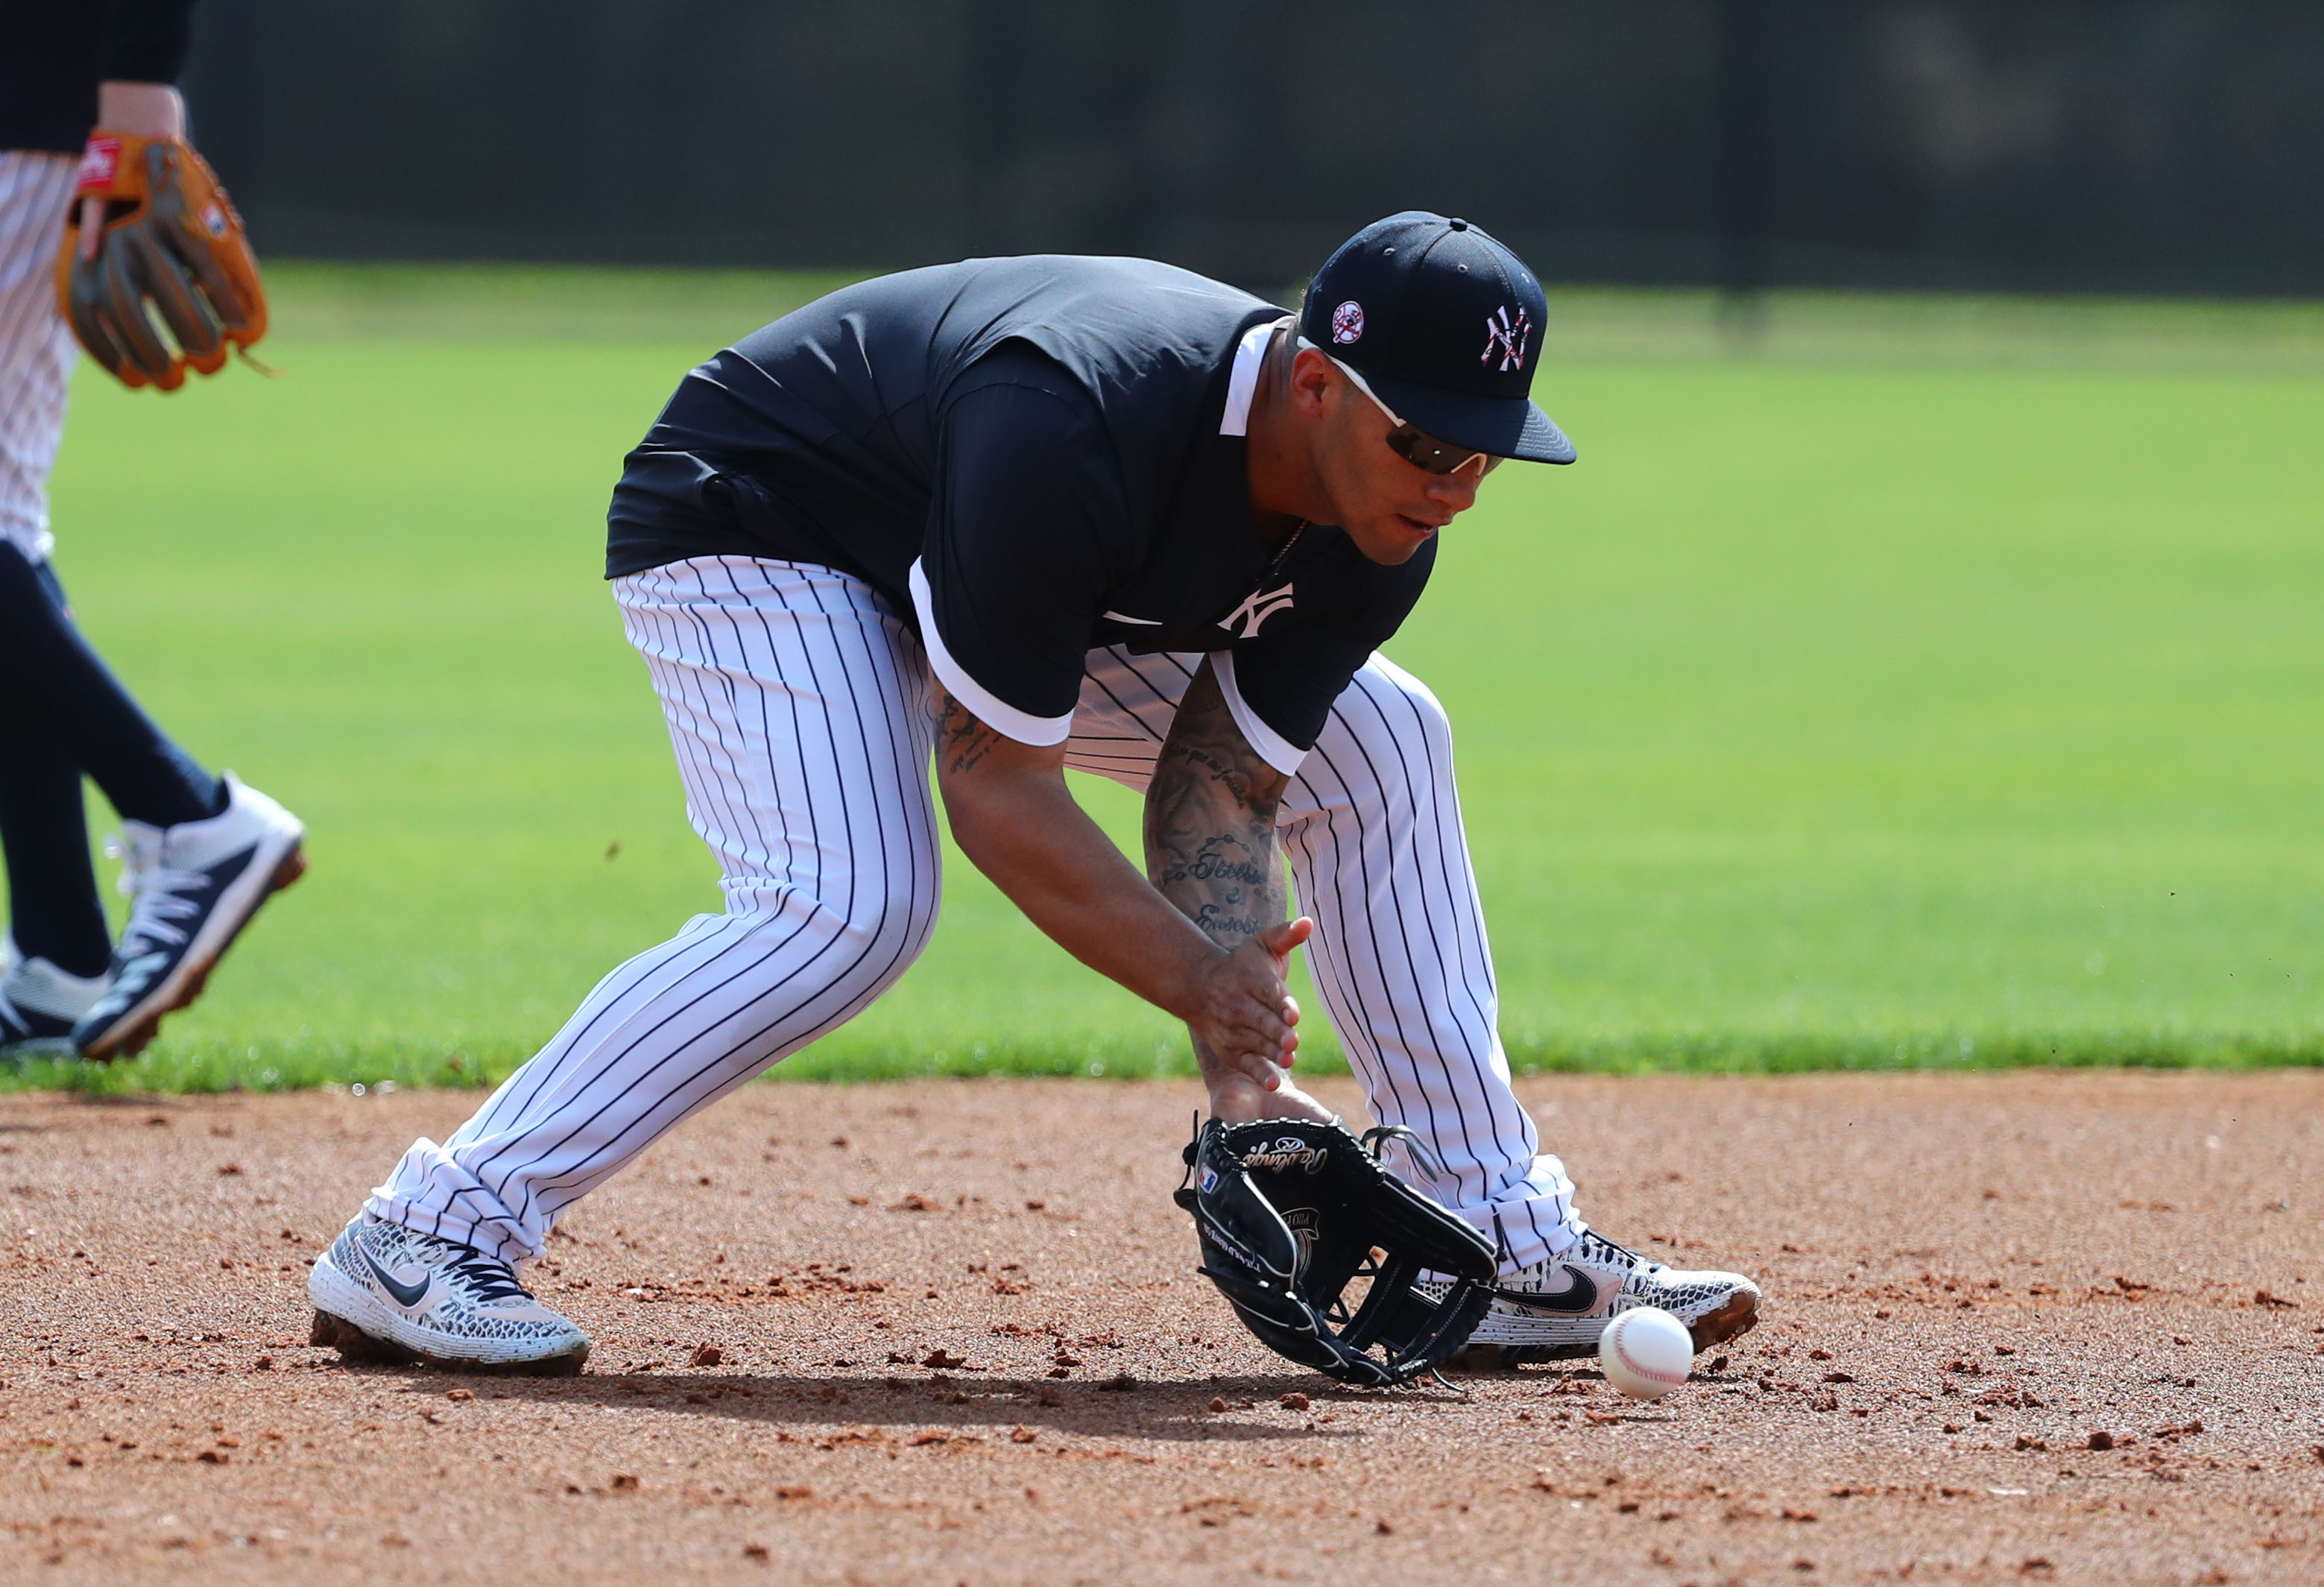 Gleyber Torres' errors as Yankees' shortstop are piling up